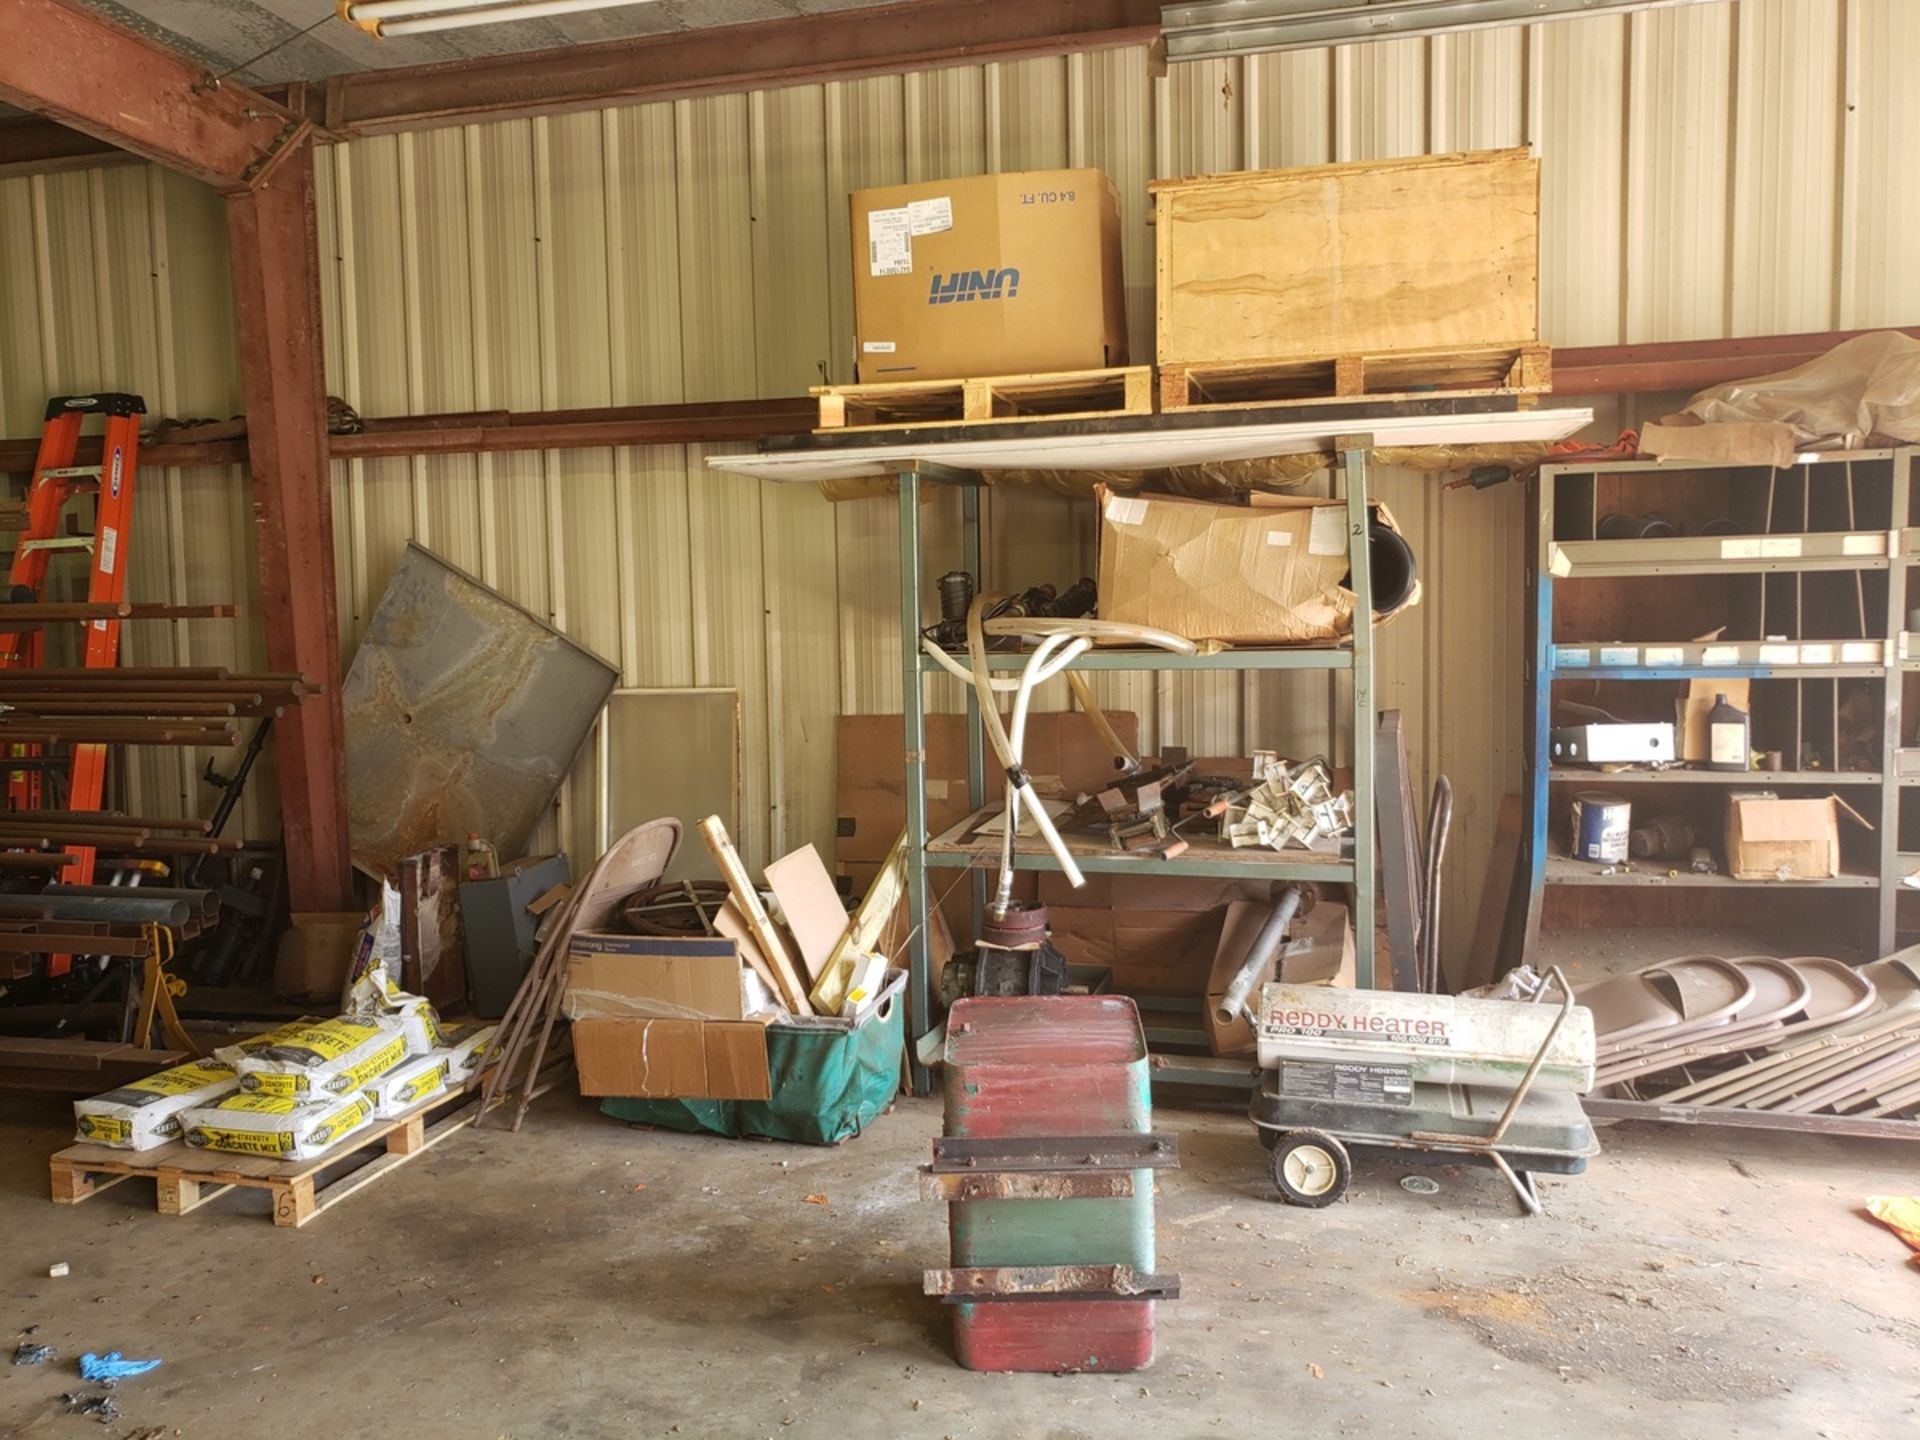 Contents of Outside Storage Shed | Rig Fee: $350 - Image 4 of 5